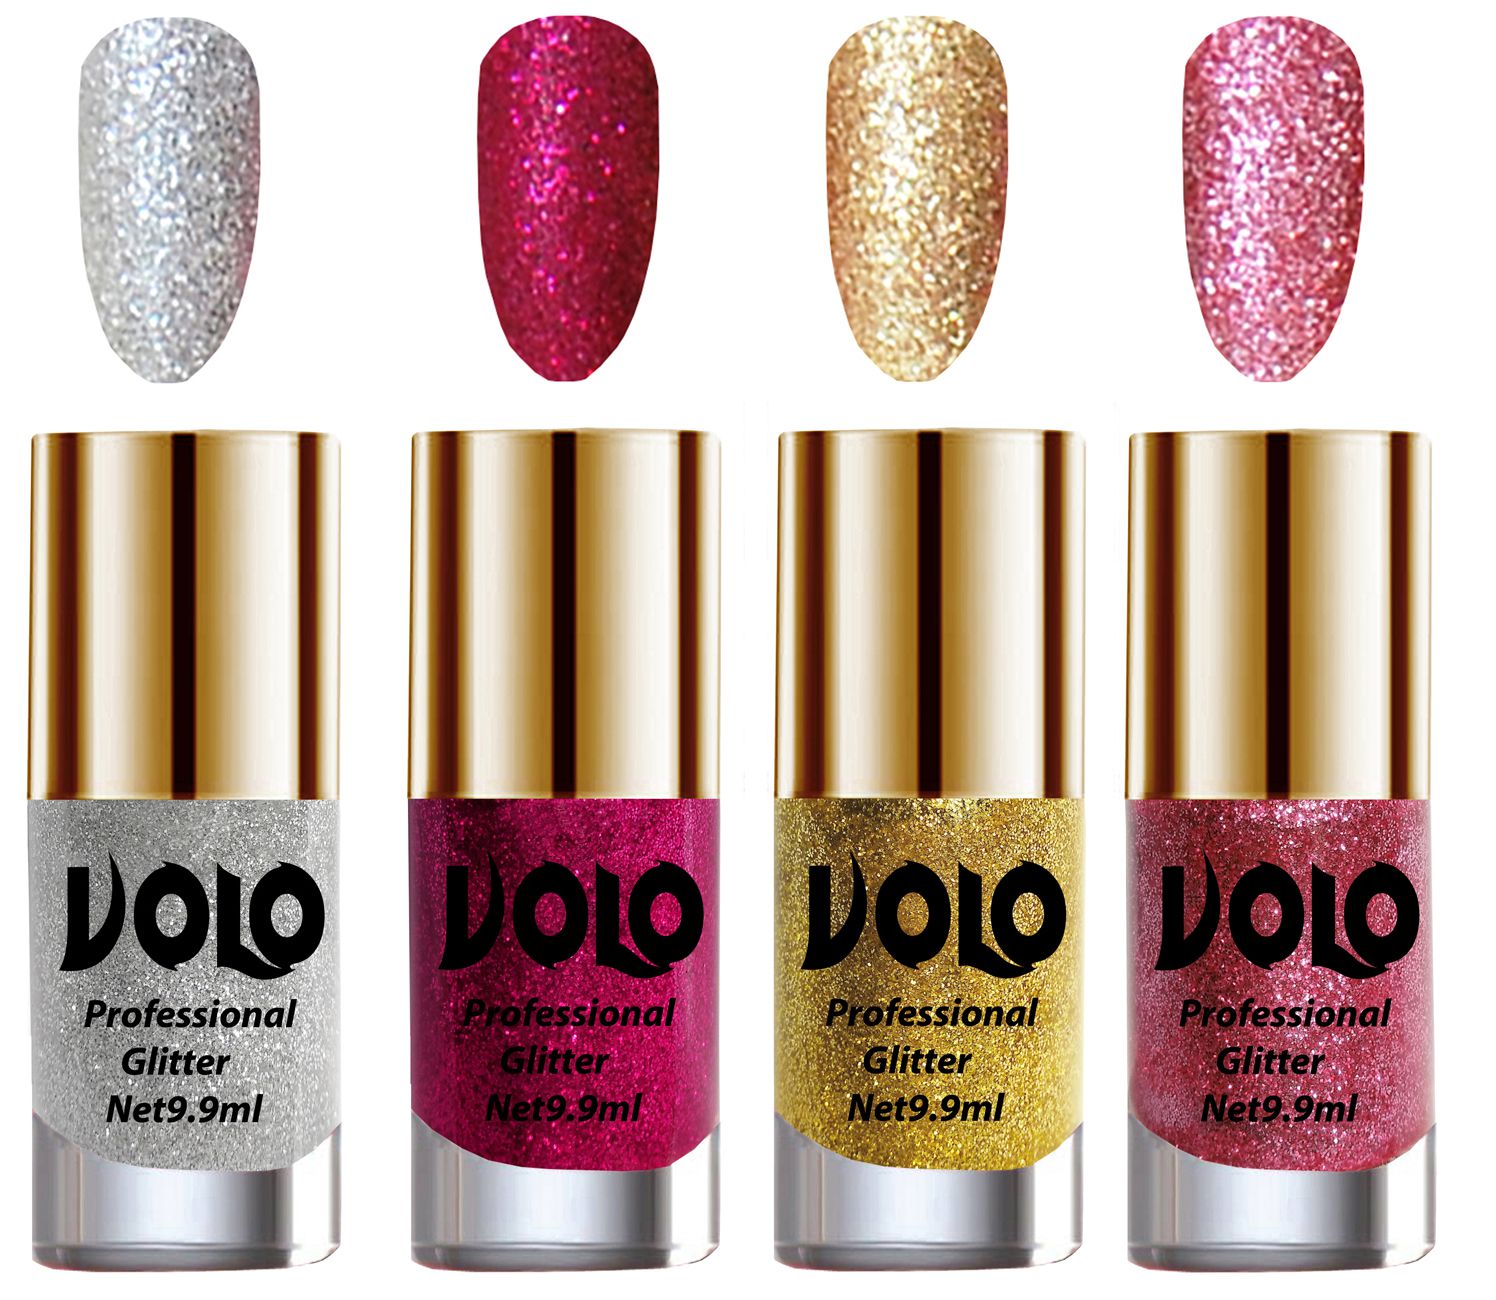     			VOLO Professionally Used Glitter Shine Nail Polish Silver,Magenta,Gold Pink Pack of 4 39 mL